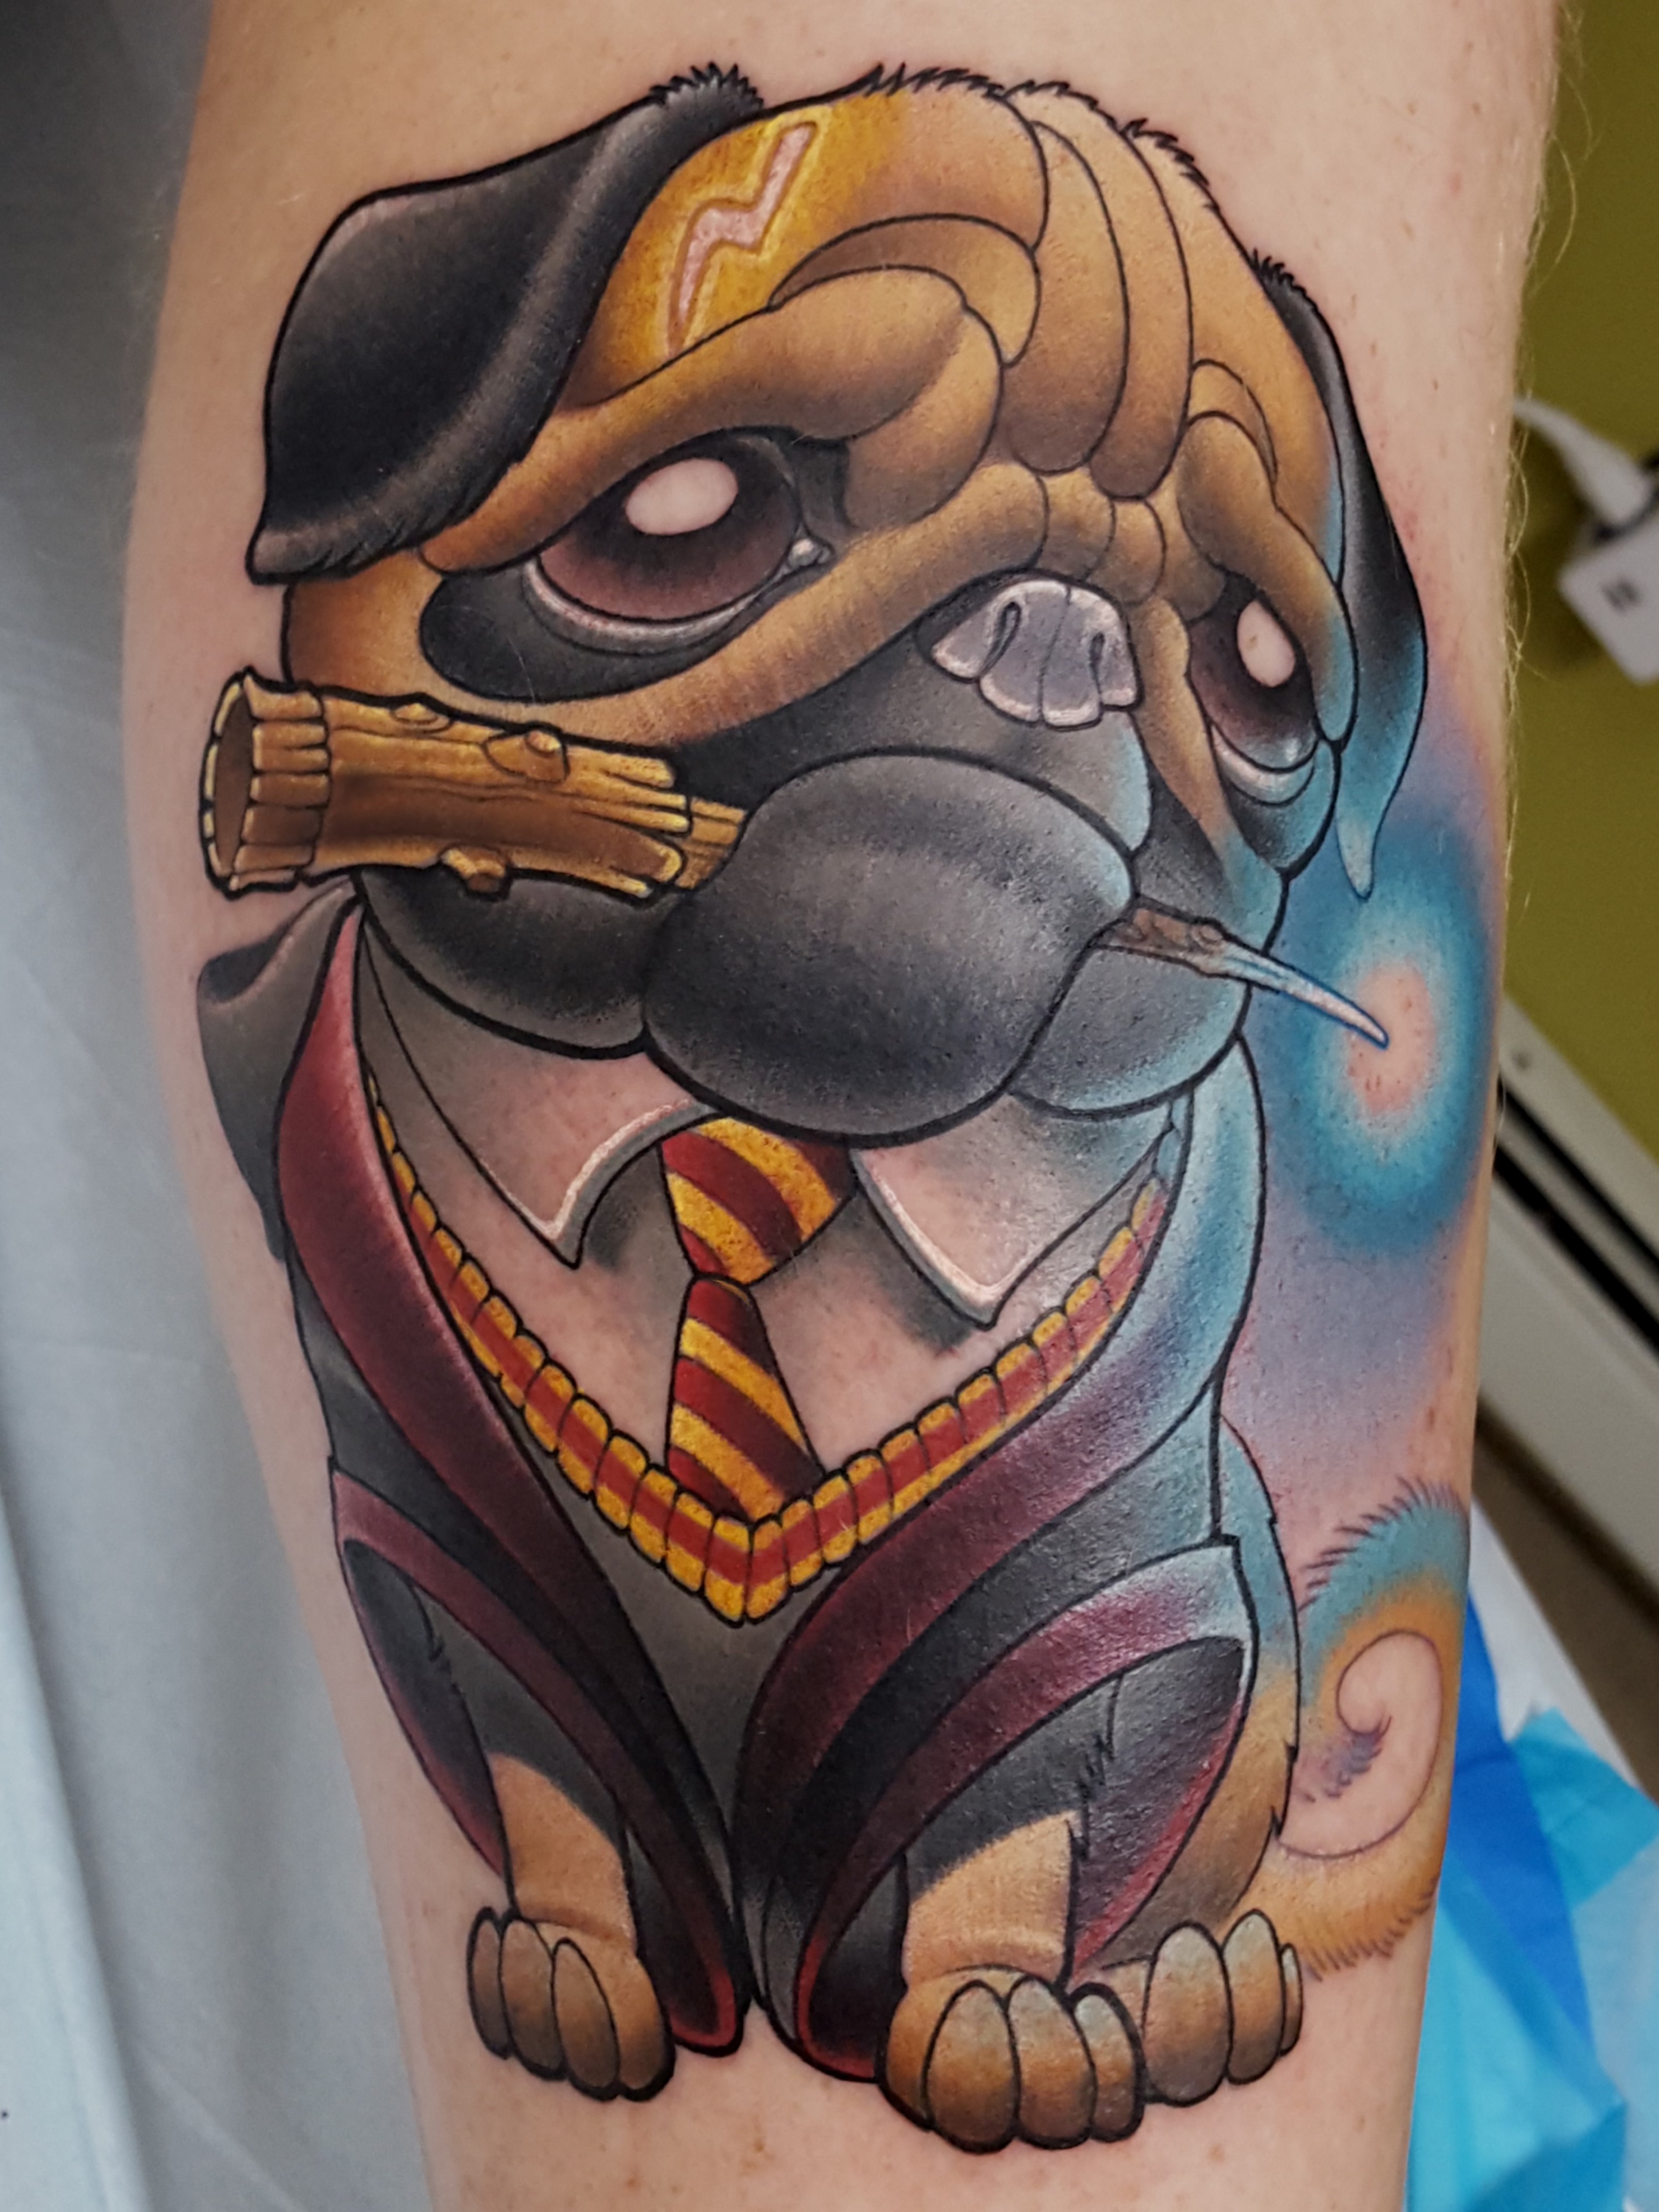 Harry Potter Pug Tattoo by Cracker Joe Swider in Connecticut